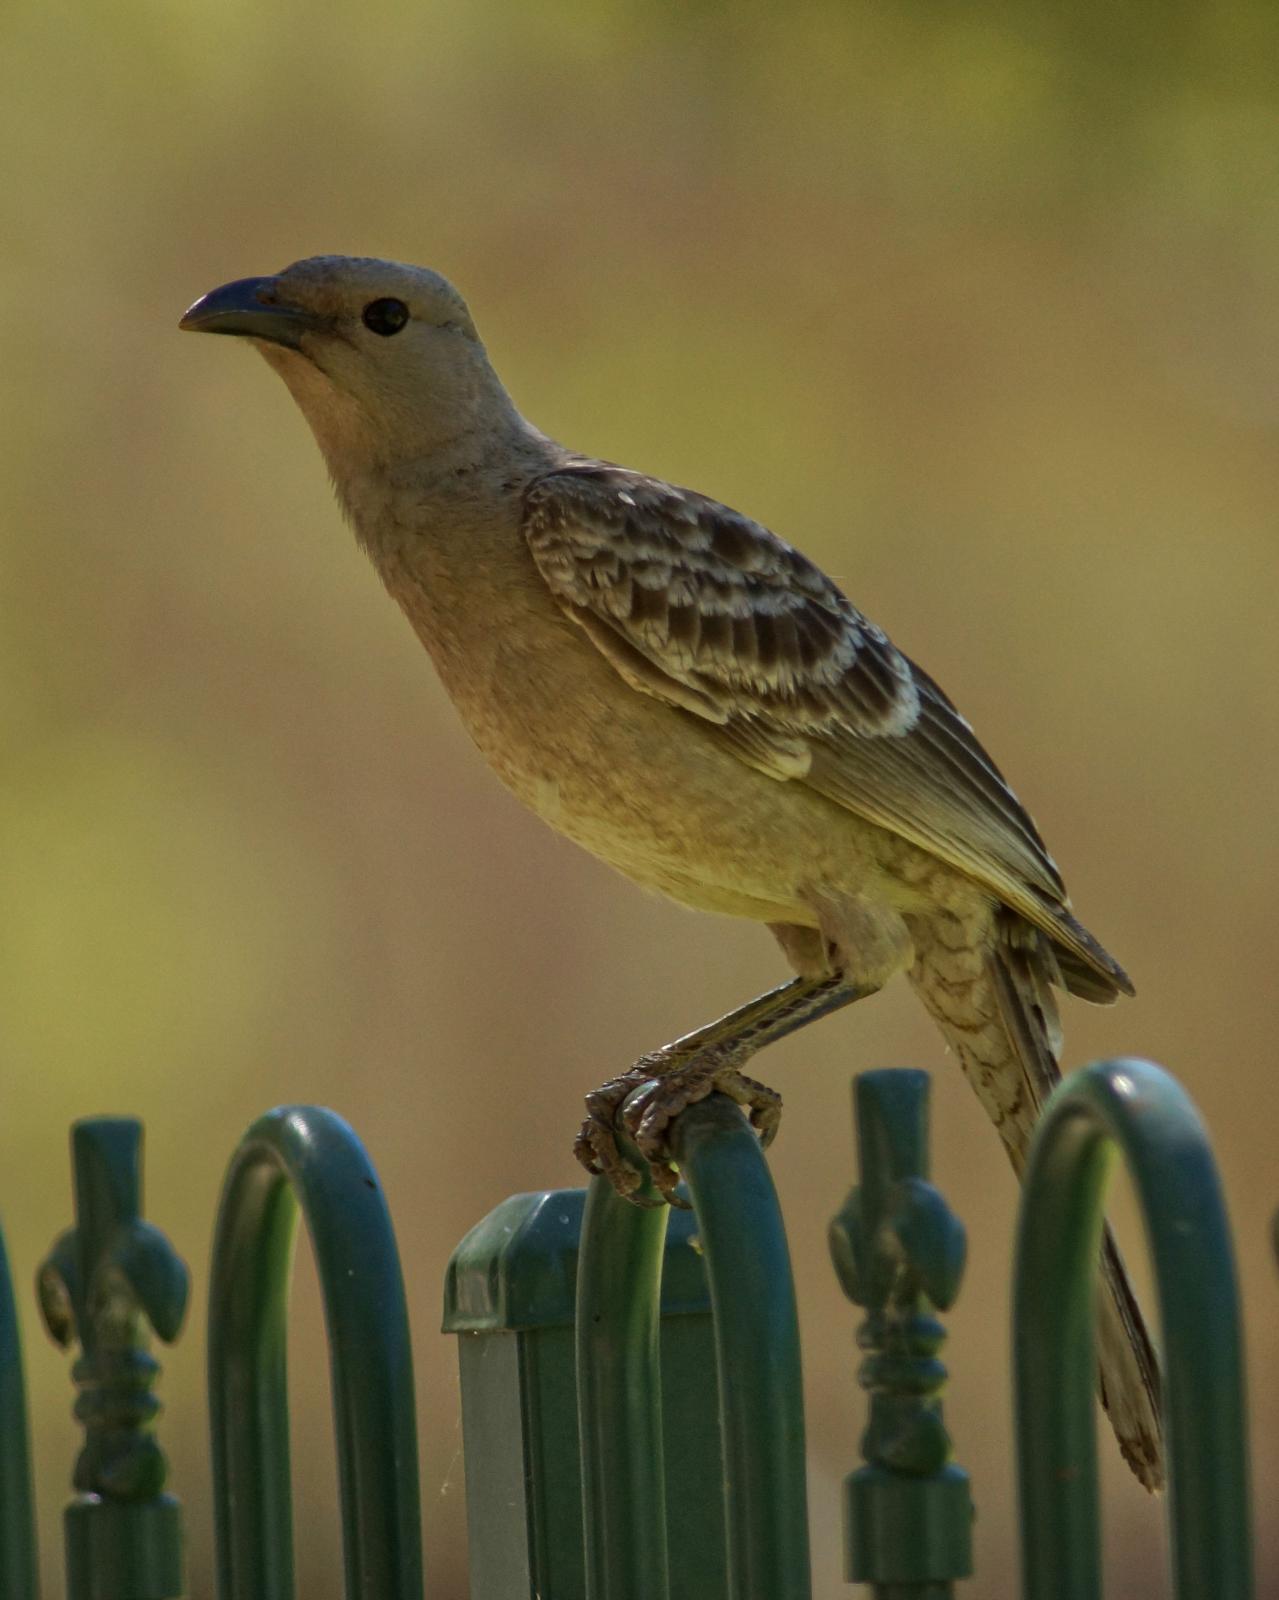 Great Bowerbird Photo by Steve Percival